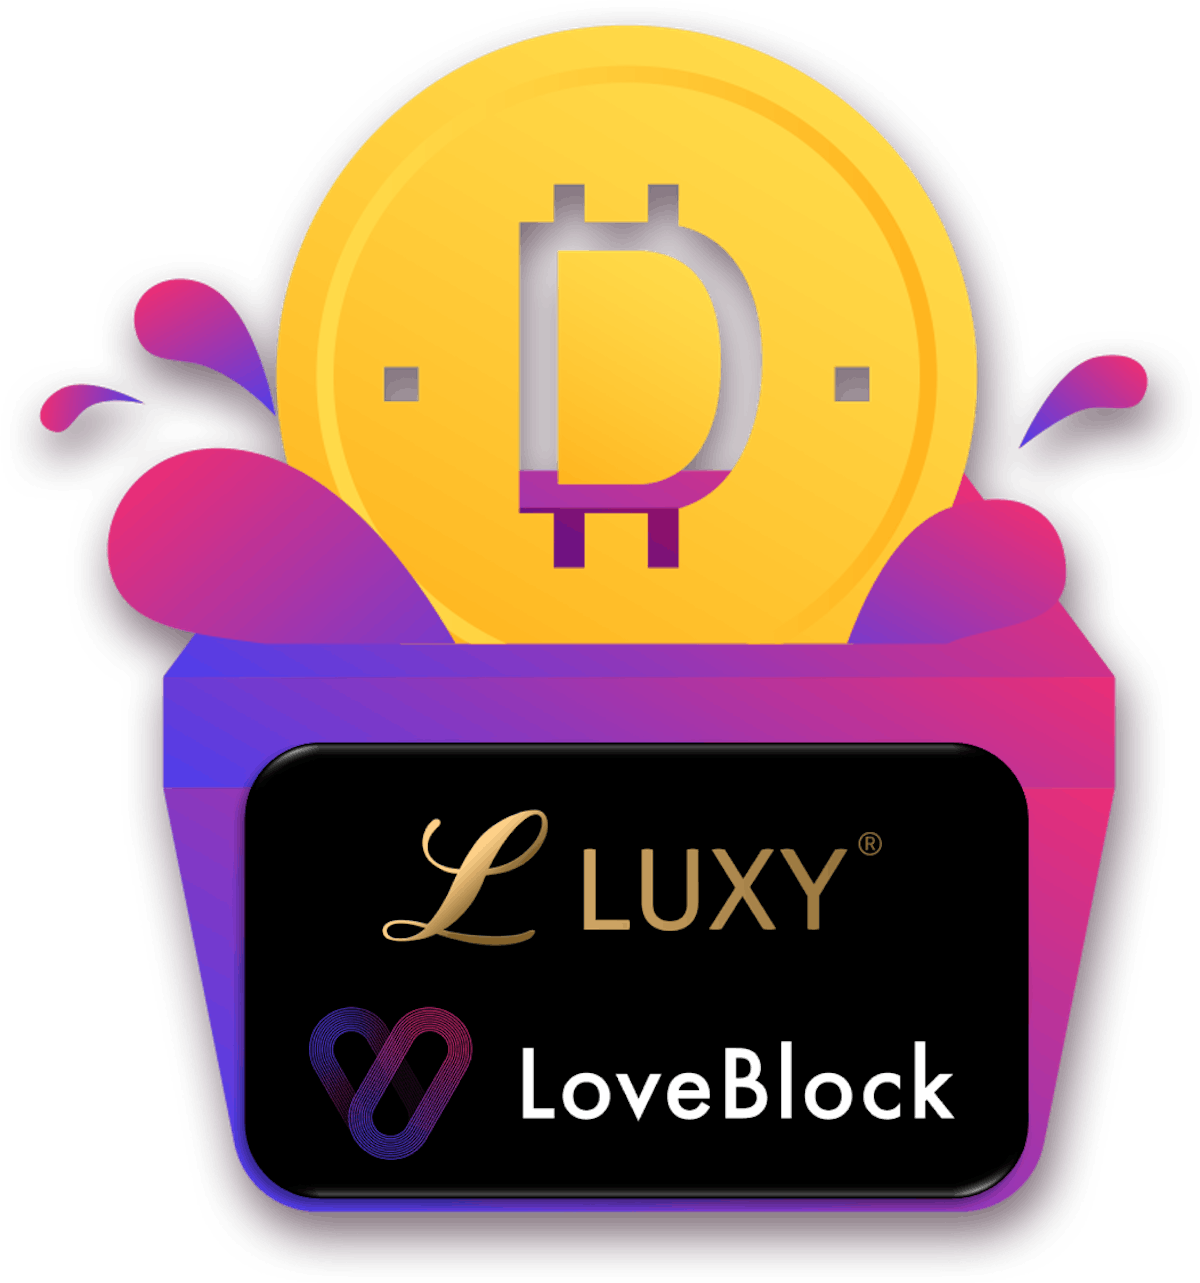 featured image - Decentralized Database LoveBlock has officially partnered with millionaire dating app Luxy